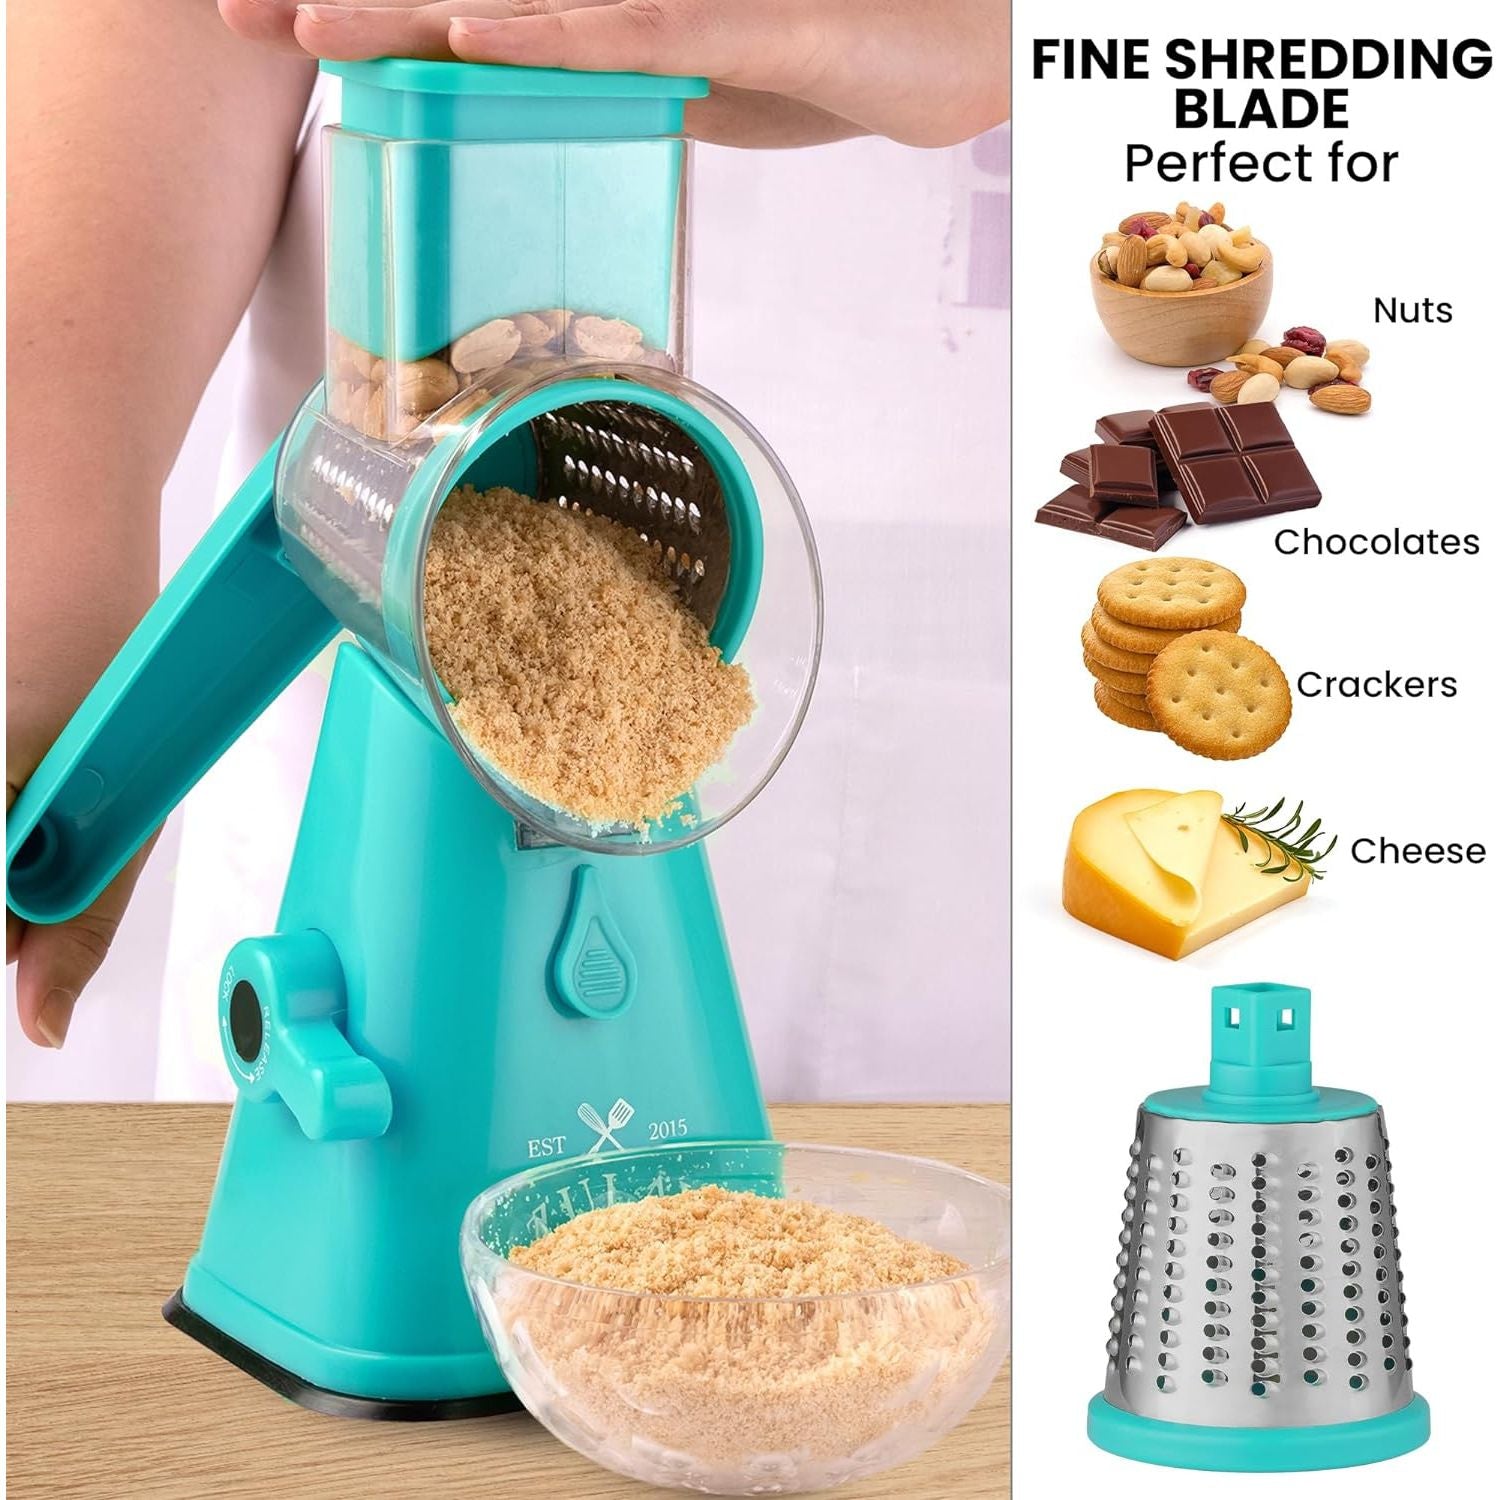 Manual Rotary Cheese Grater